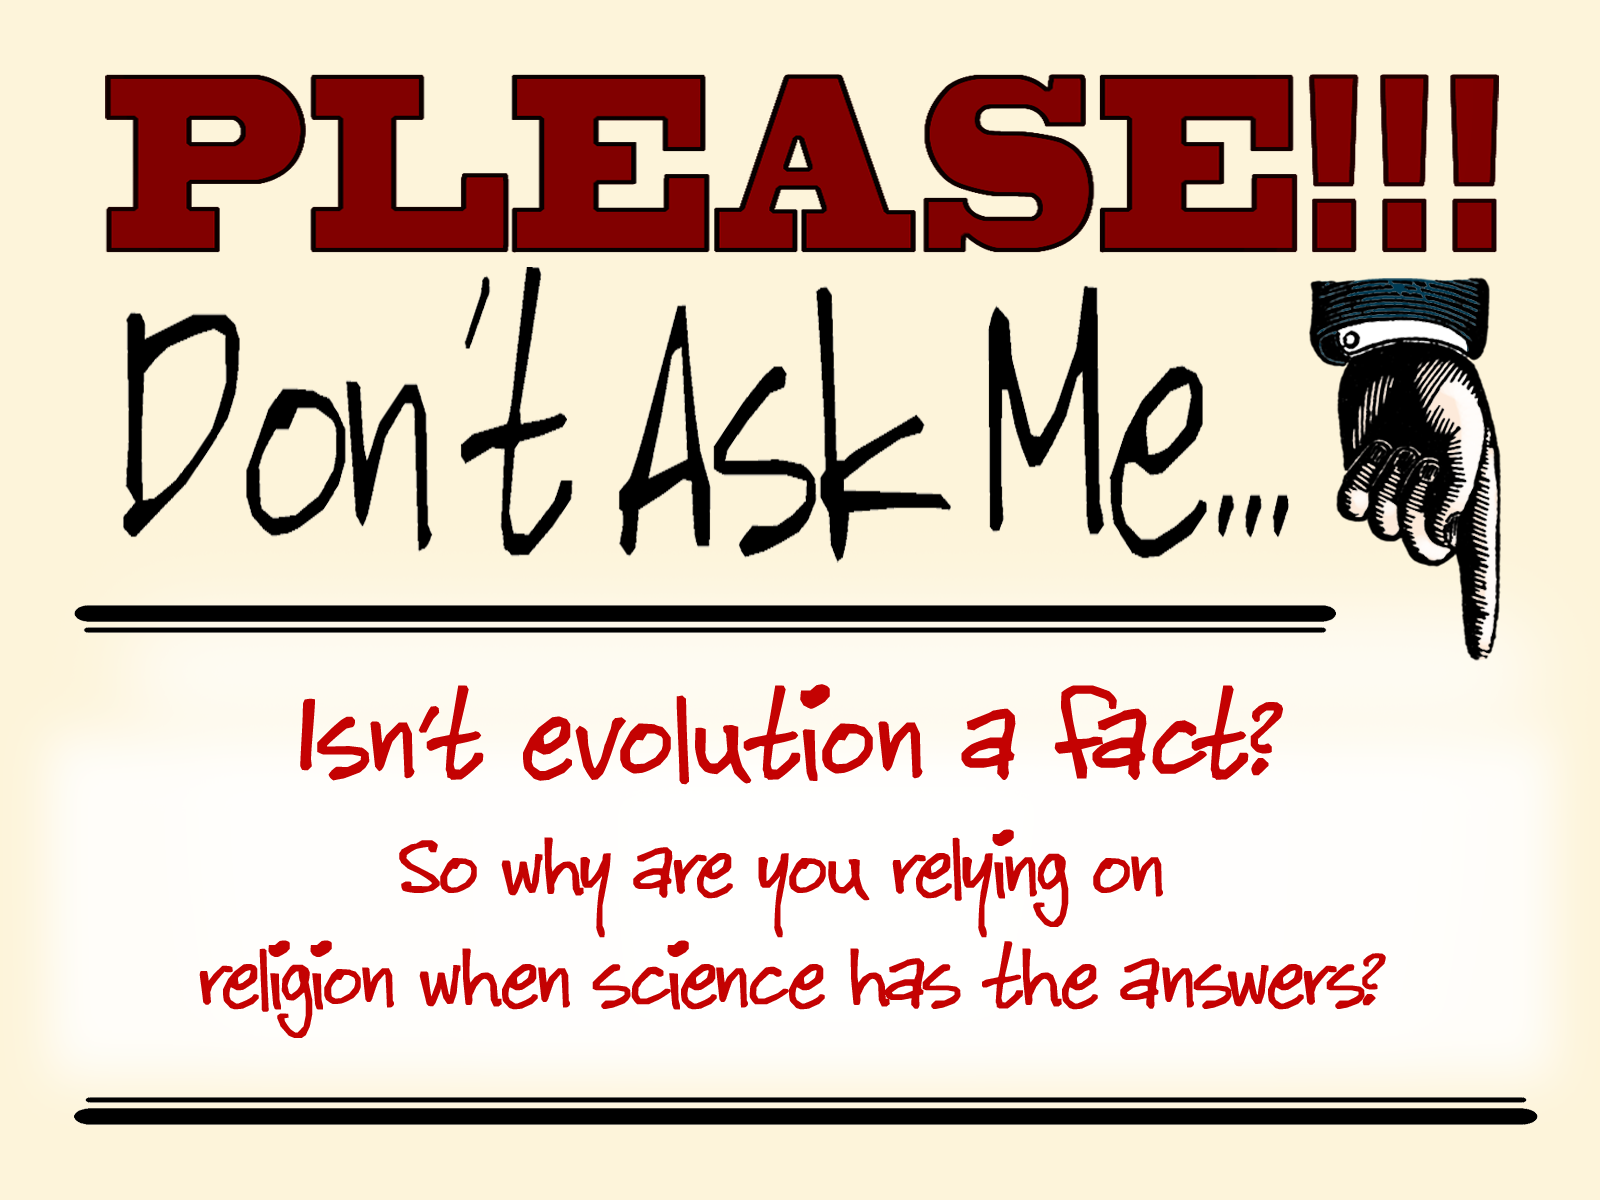 Please don’t ask me…Isn’t evolution a fact, so why are you relying on religion when science has the answers?